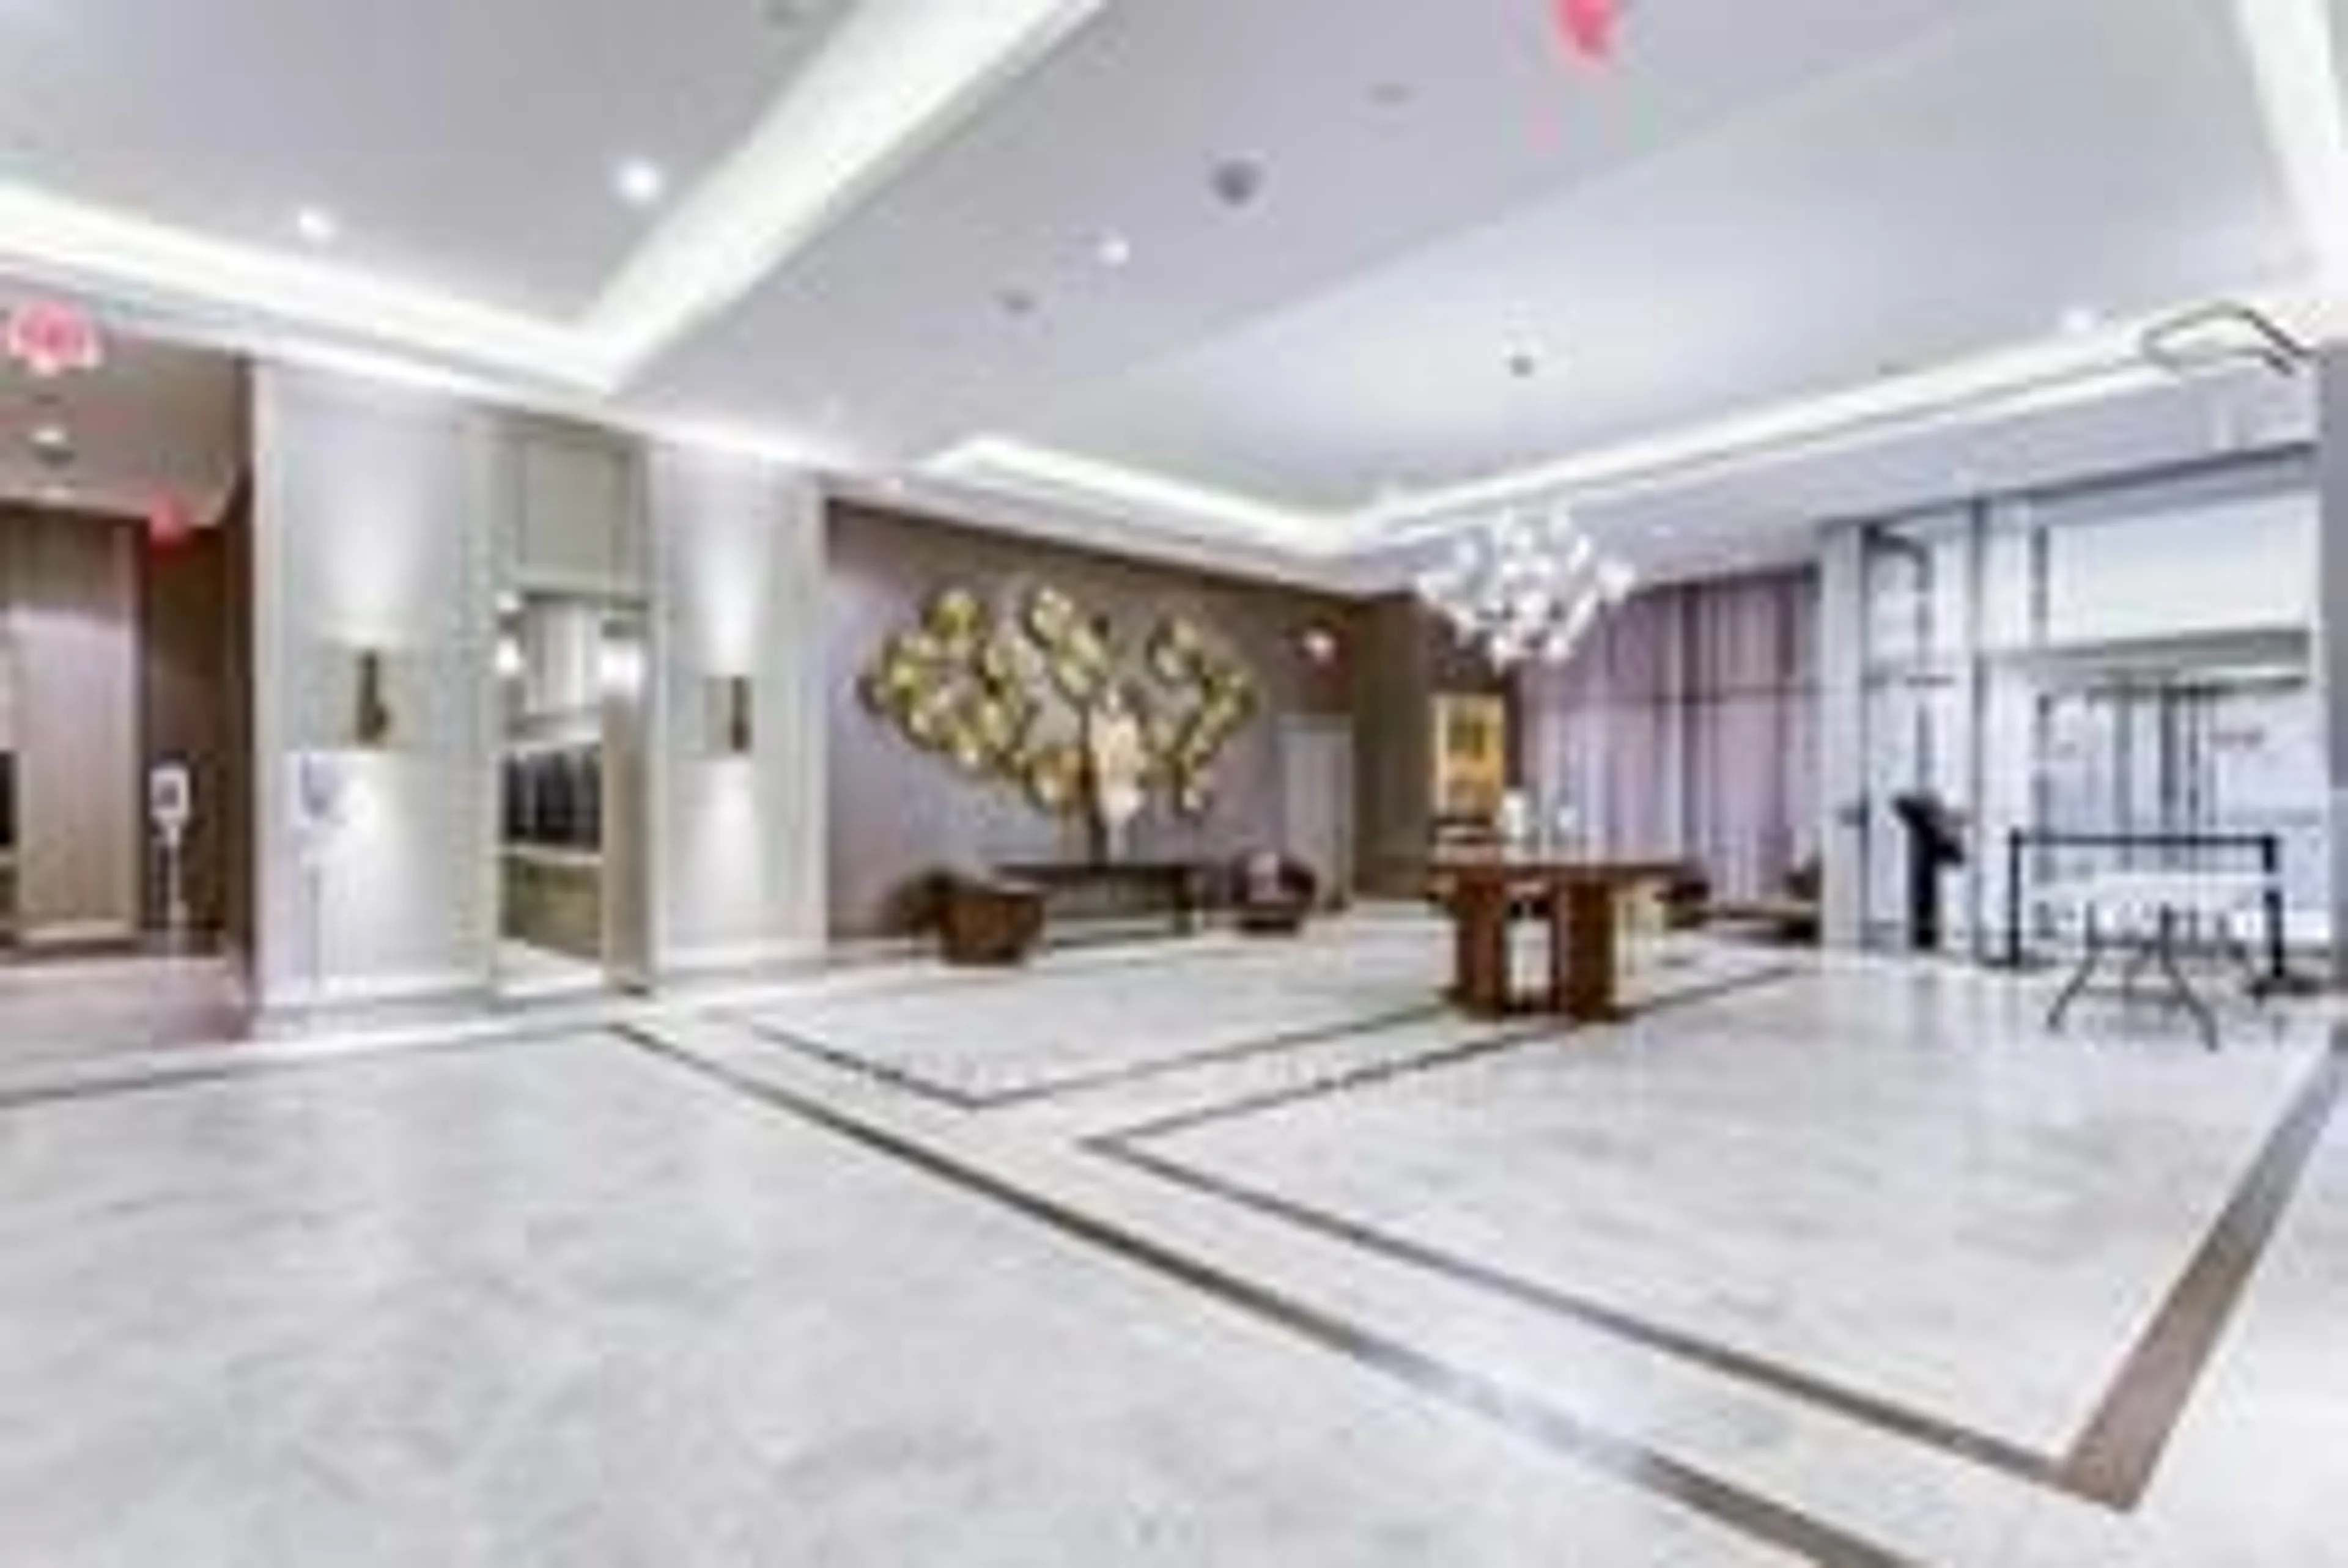 Indoor lobby for 155 Yorkville Ave #1103, Toronto Ontario M5R 1C4